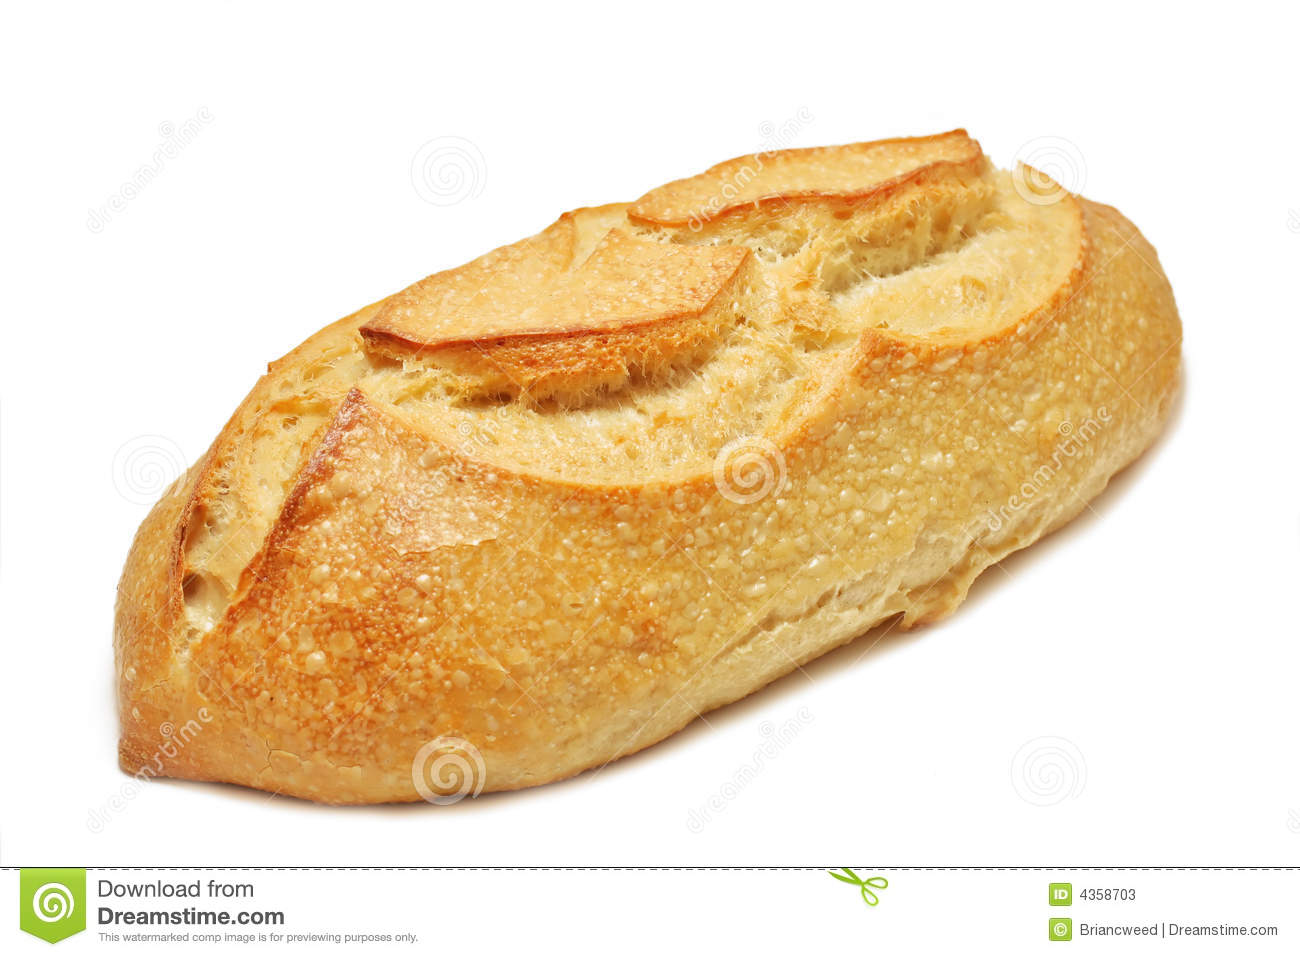 Loaf Of Unsliced Artisan Sourdough Bread Isolated On White